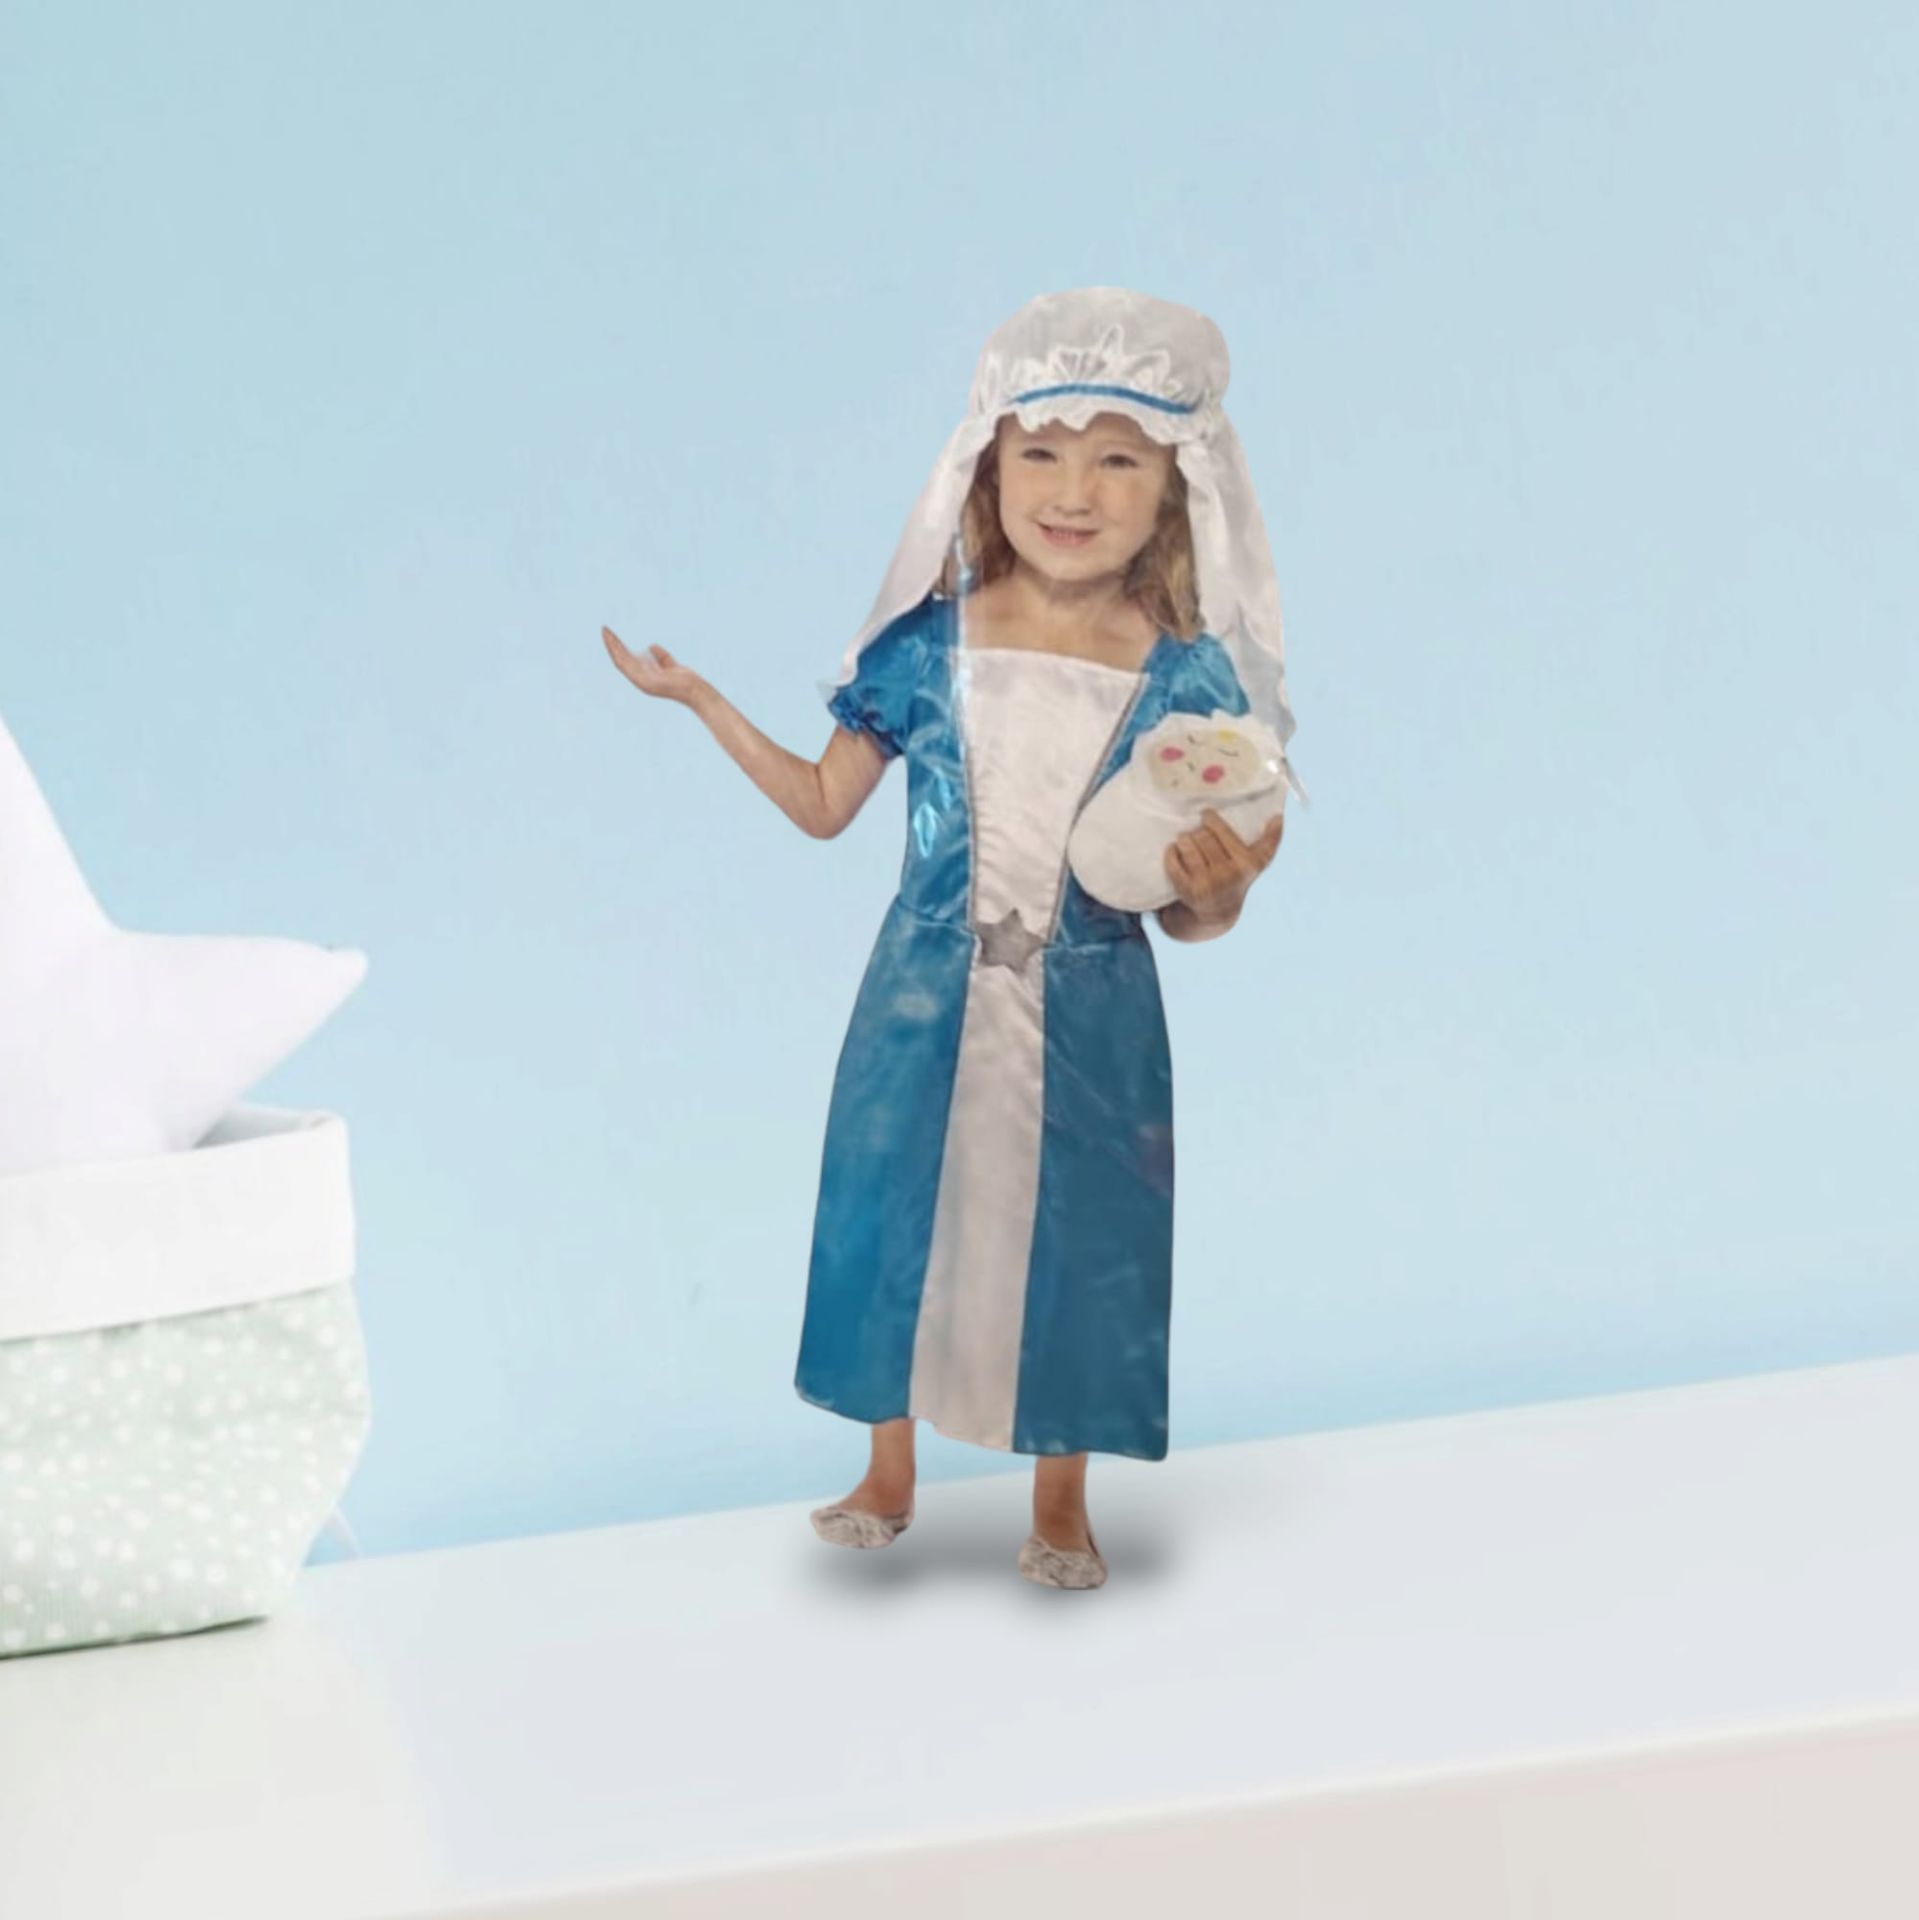 CLEARANCE!!! 300 PACKS OF VIRGIN MARY NATIVITY COSTUMES FANCY DRESS RETAIL PACKED - RRP £3000!